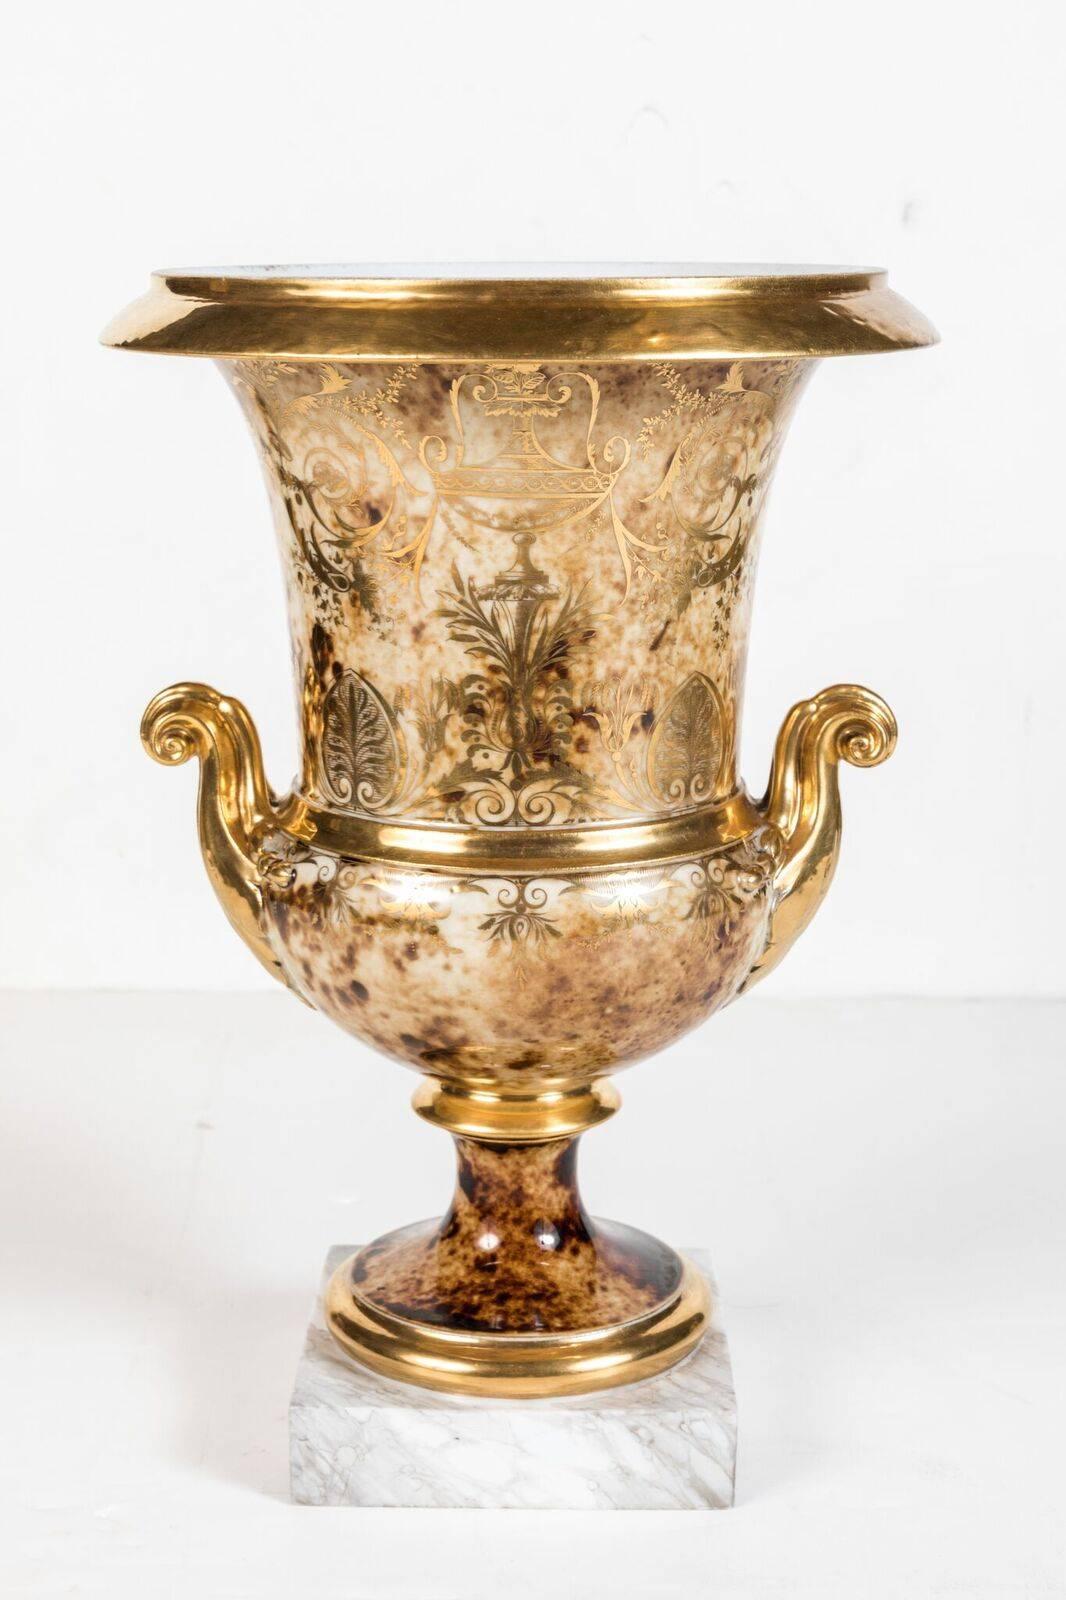 Early 19th Century 19th Century, Hand-Painted Porcelain Urns For Sale